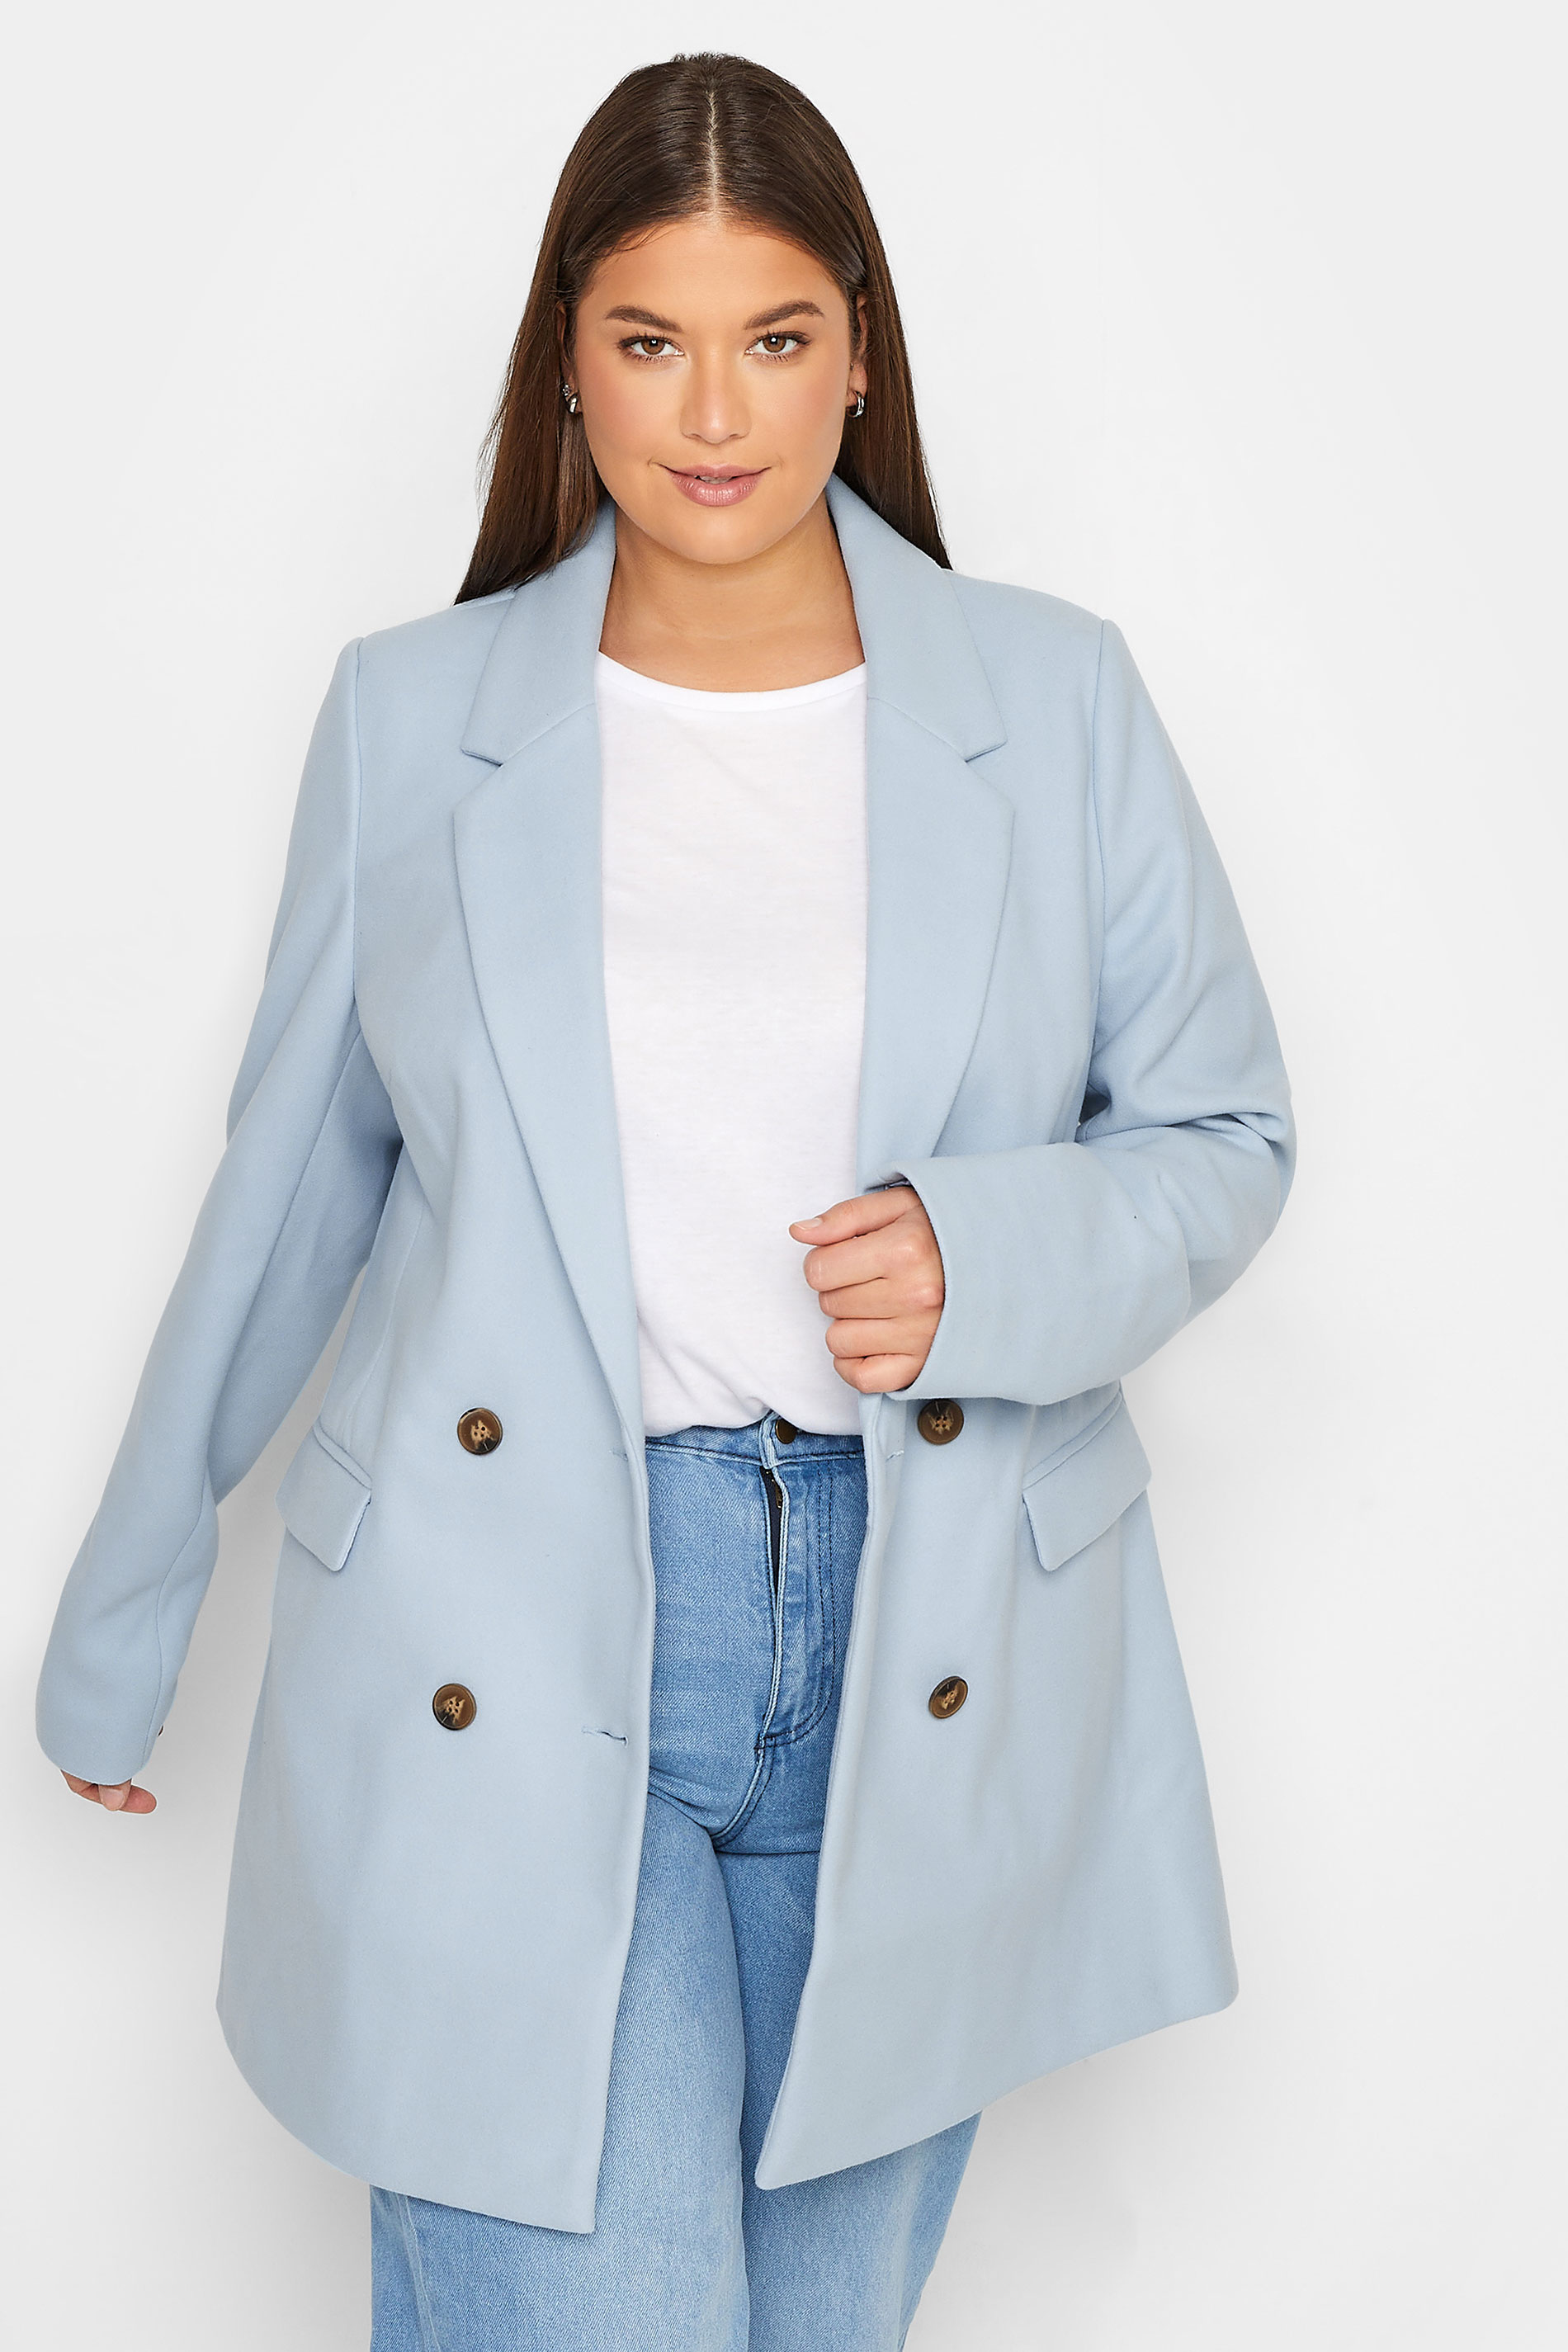 LTS Tall Women's Light Blue Double Breasted Brushed Jacket | Long Tall Sally 1